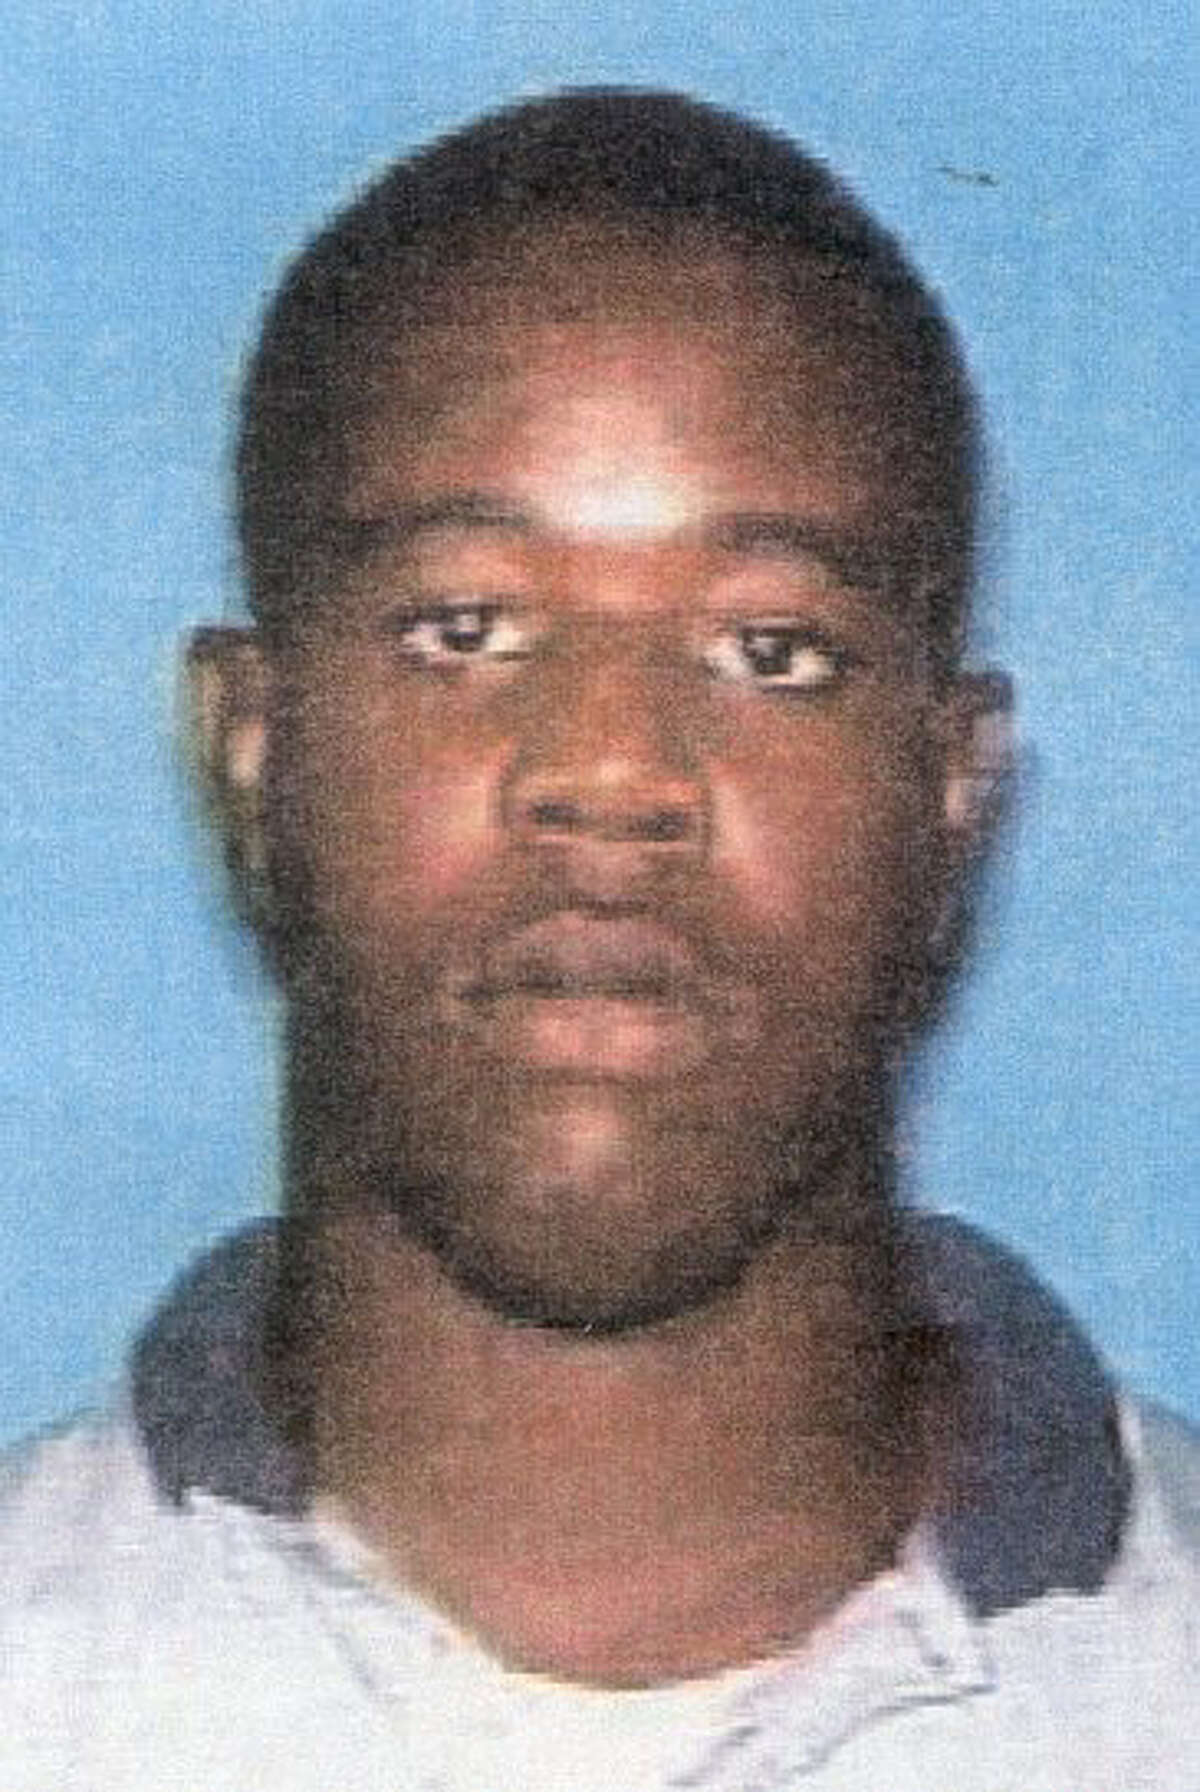 Perry Eugene Williams (b/m, DOB 09-22-80). Date: September 21, 2000. Subject: Incident at 7575 Brompton. UPDATE: Capital murder charges have been filed against three of four suspects arrested in the fatal shooting of a man found at 7575 Brompton about 7:30 a.m. Monday (Sept. 18). Houston Police Homicide Division Investigator T.W. Miller said the suspects are identified as Perry Eugene Williams (b/m, DOB 09-22-80). CHARGED IN MURDER OF MATTHEW CARTER. HOUCHRON CAPTION (09/22/2000)(06/02/2001)(06/08/2002): Williams.